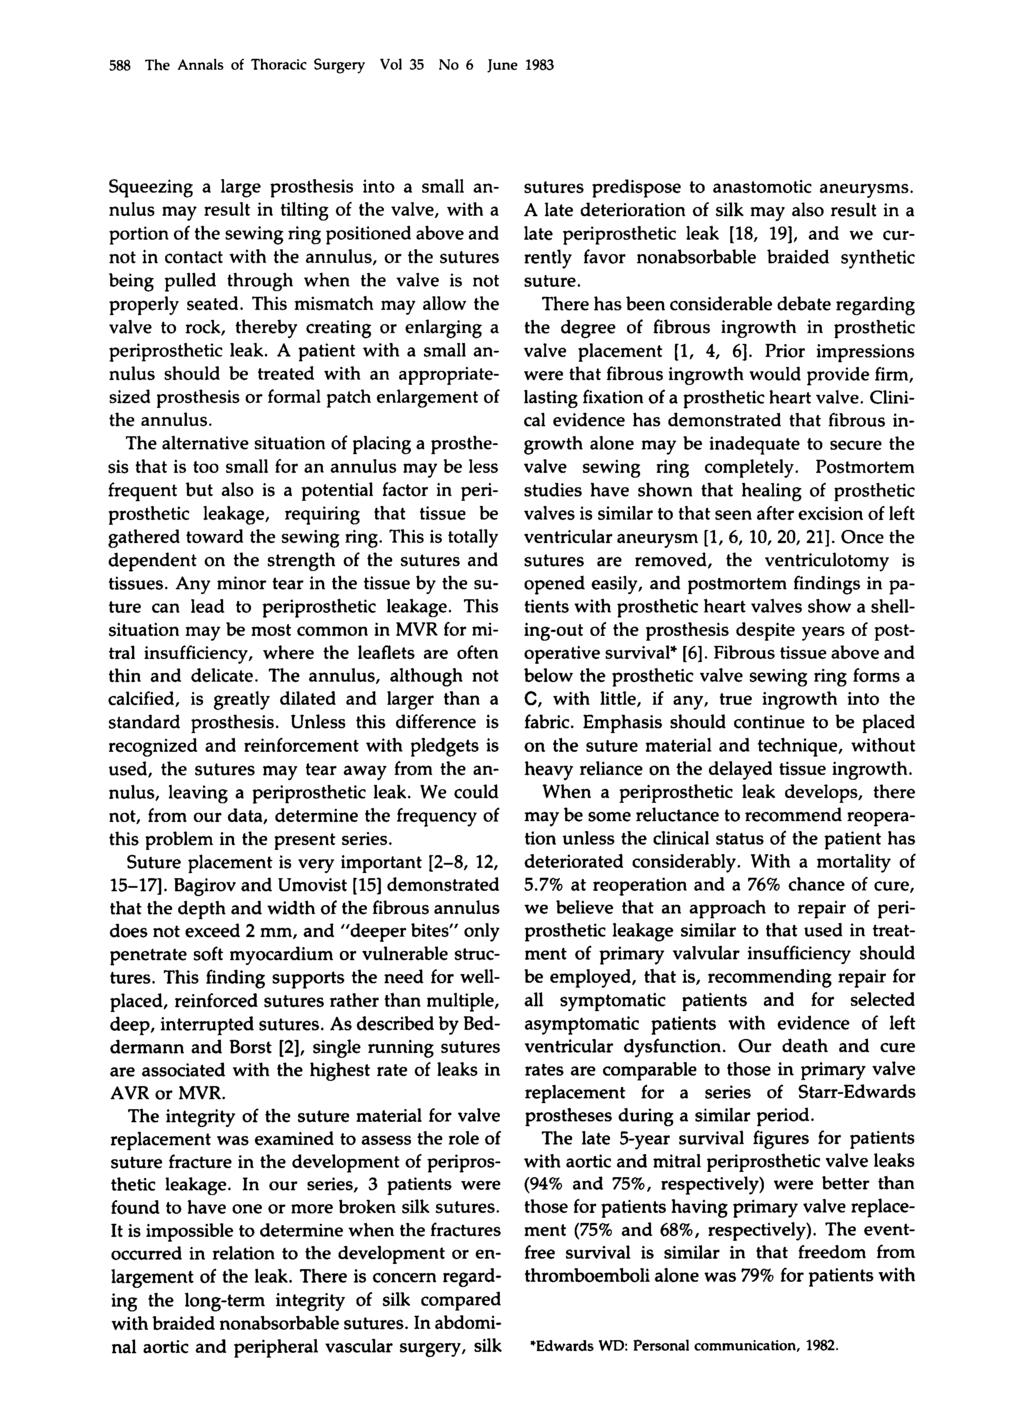 588 The Annals of Thoracic Surgery Vol 35 No 6 June 1983 Squeezing a large prosthesis into a small annulus may result in tilting of the valve, with a portion of the sewing ring positioned above and